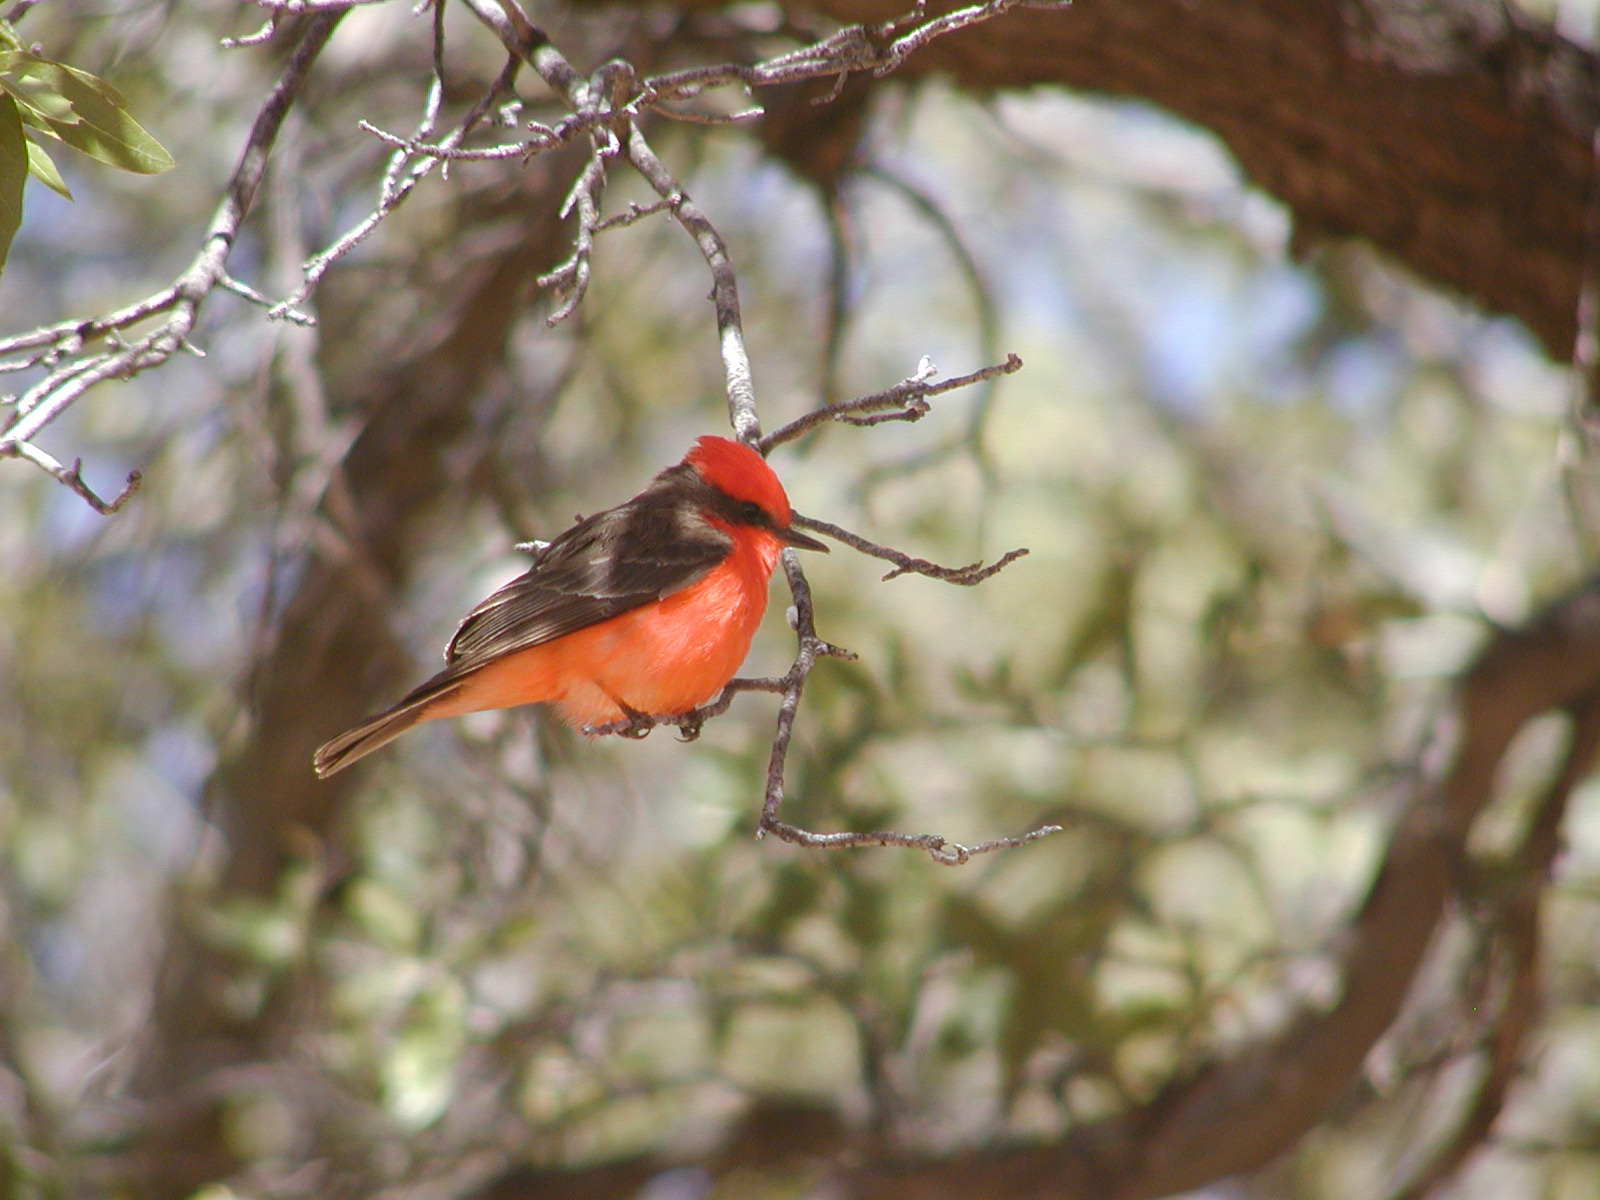 A brilliant red bird in a tree